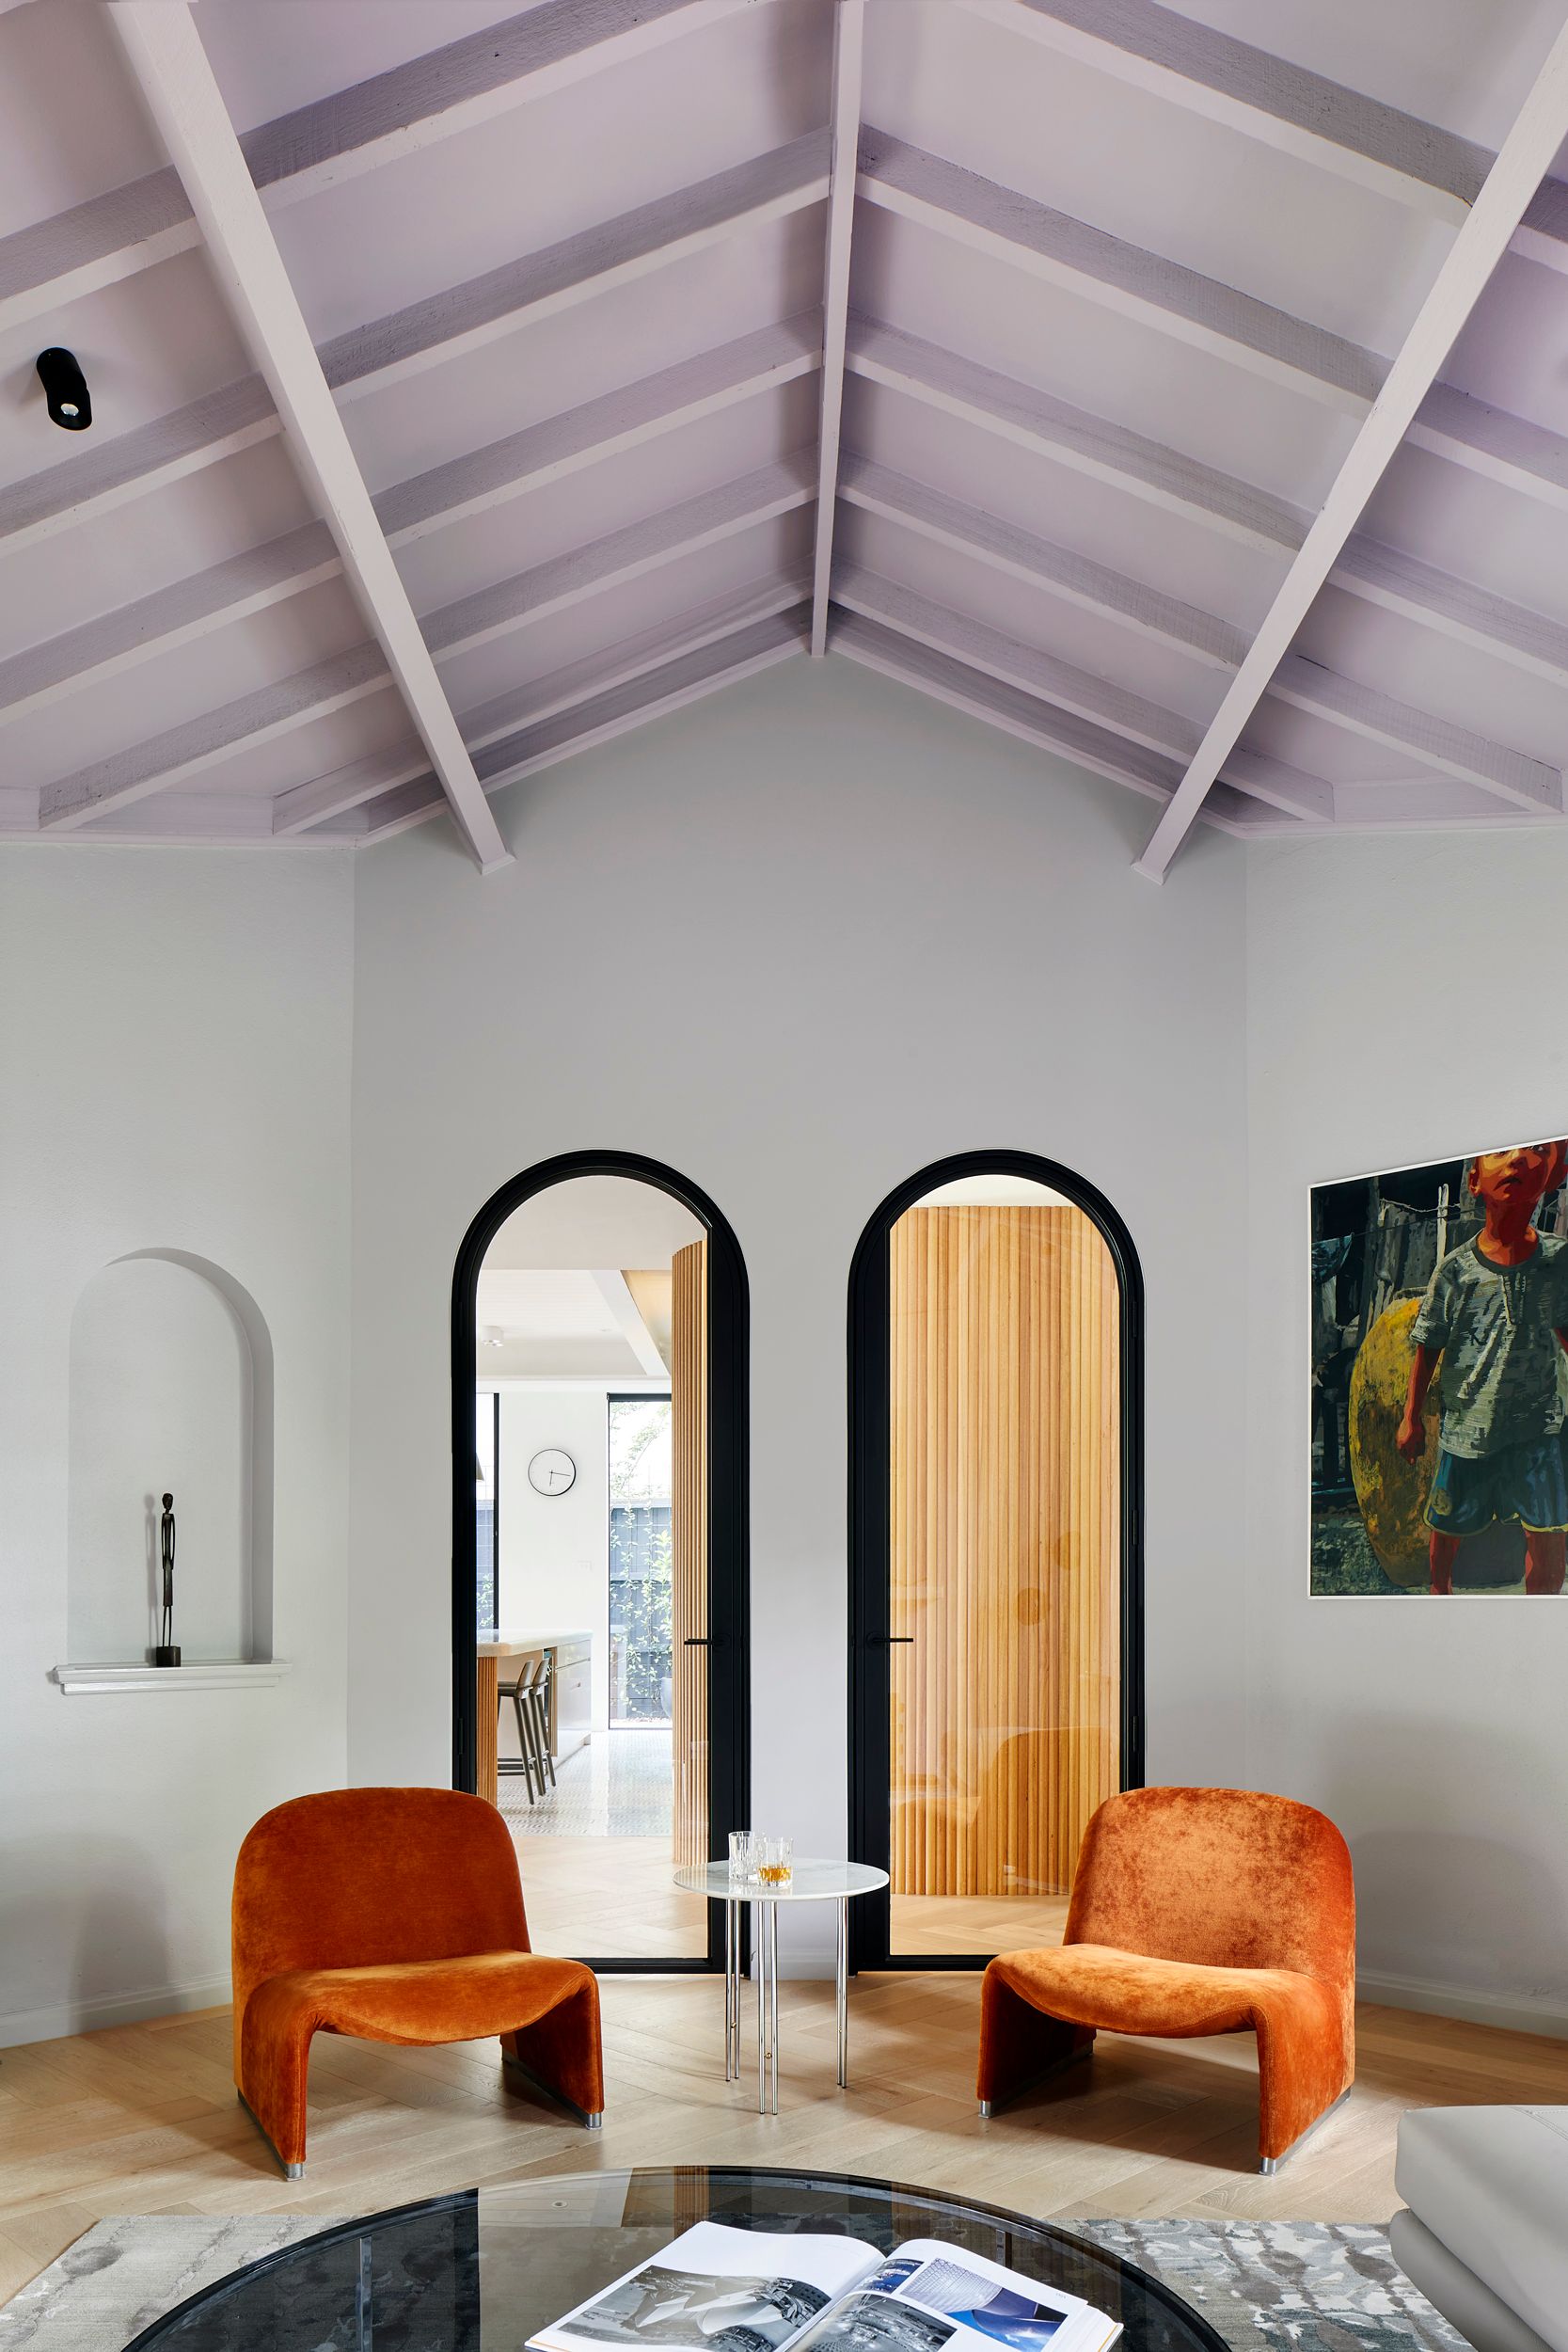 Arch Deco by Hindley & Co.  Arch deco project of Formal Living room space featuring two accent orange chairs. 